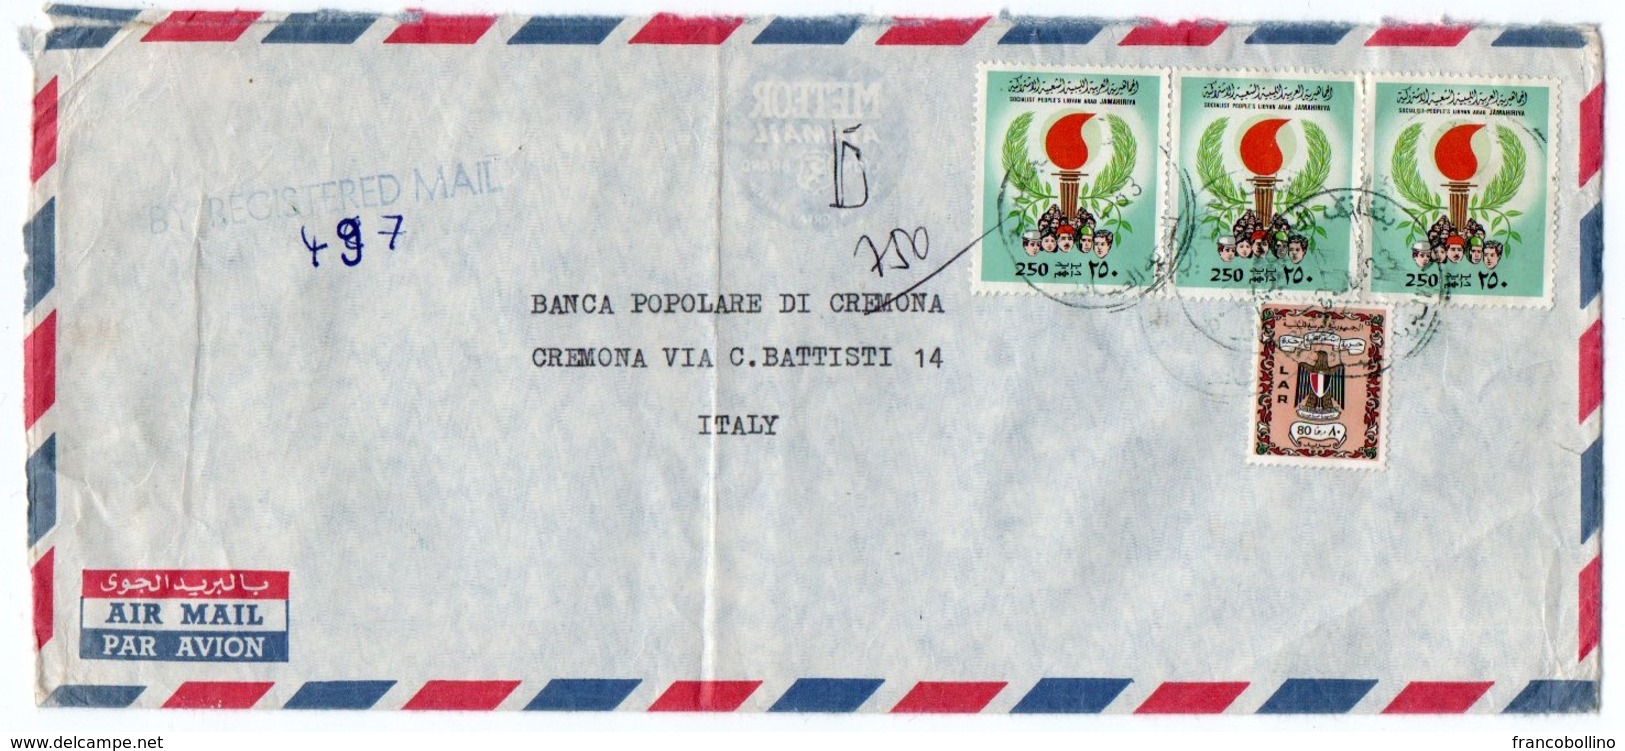 LIBYA - REGISTERE AIR MAIL COVER TO ITALY 1983 / WAHDA BANK S.A.L. - Libye